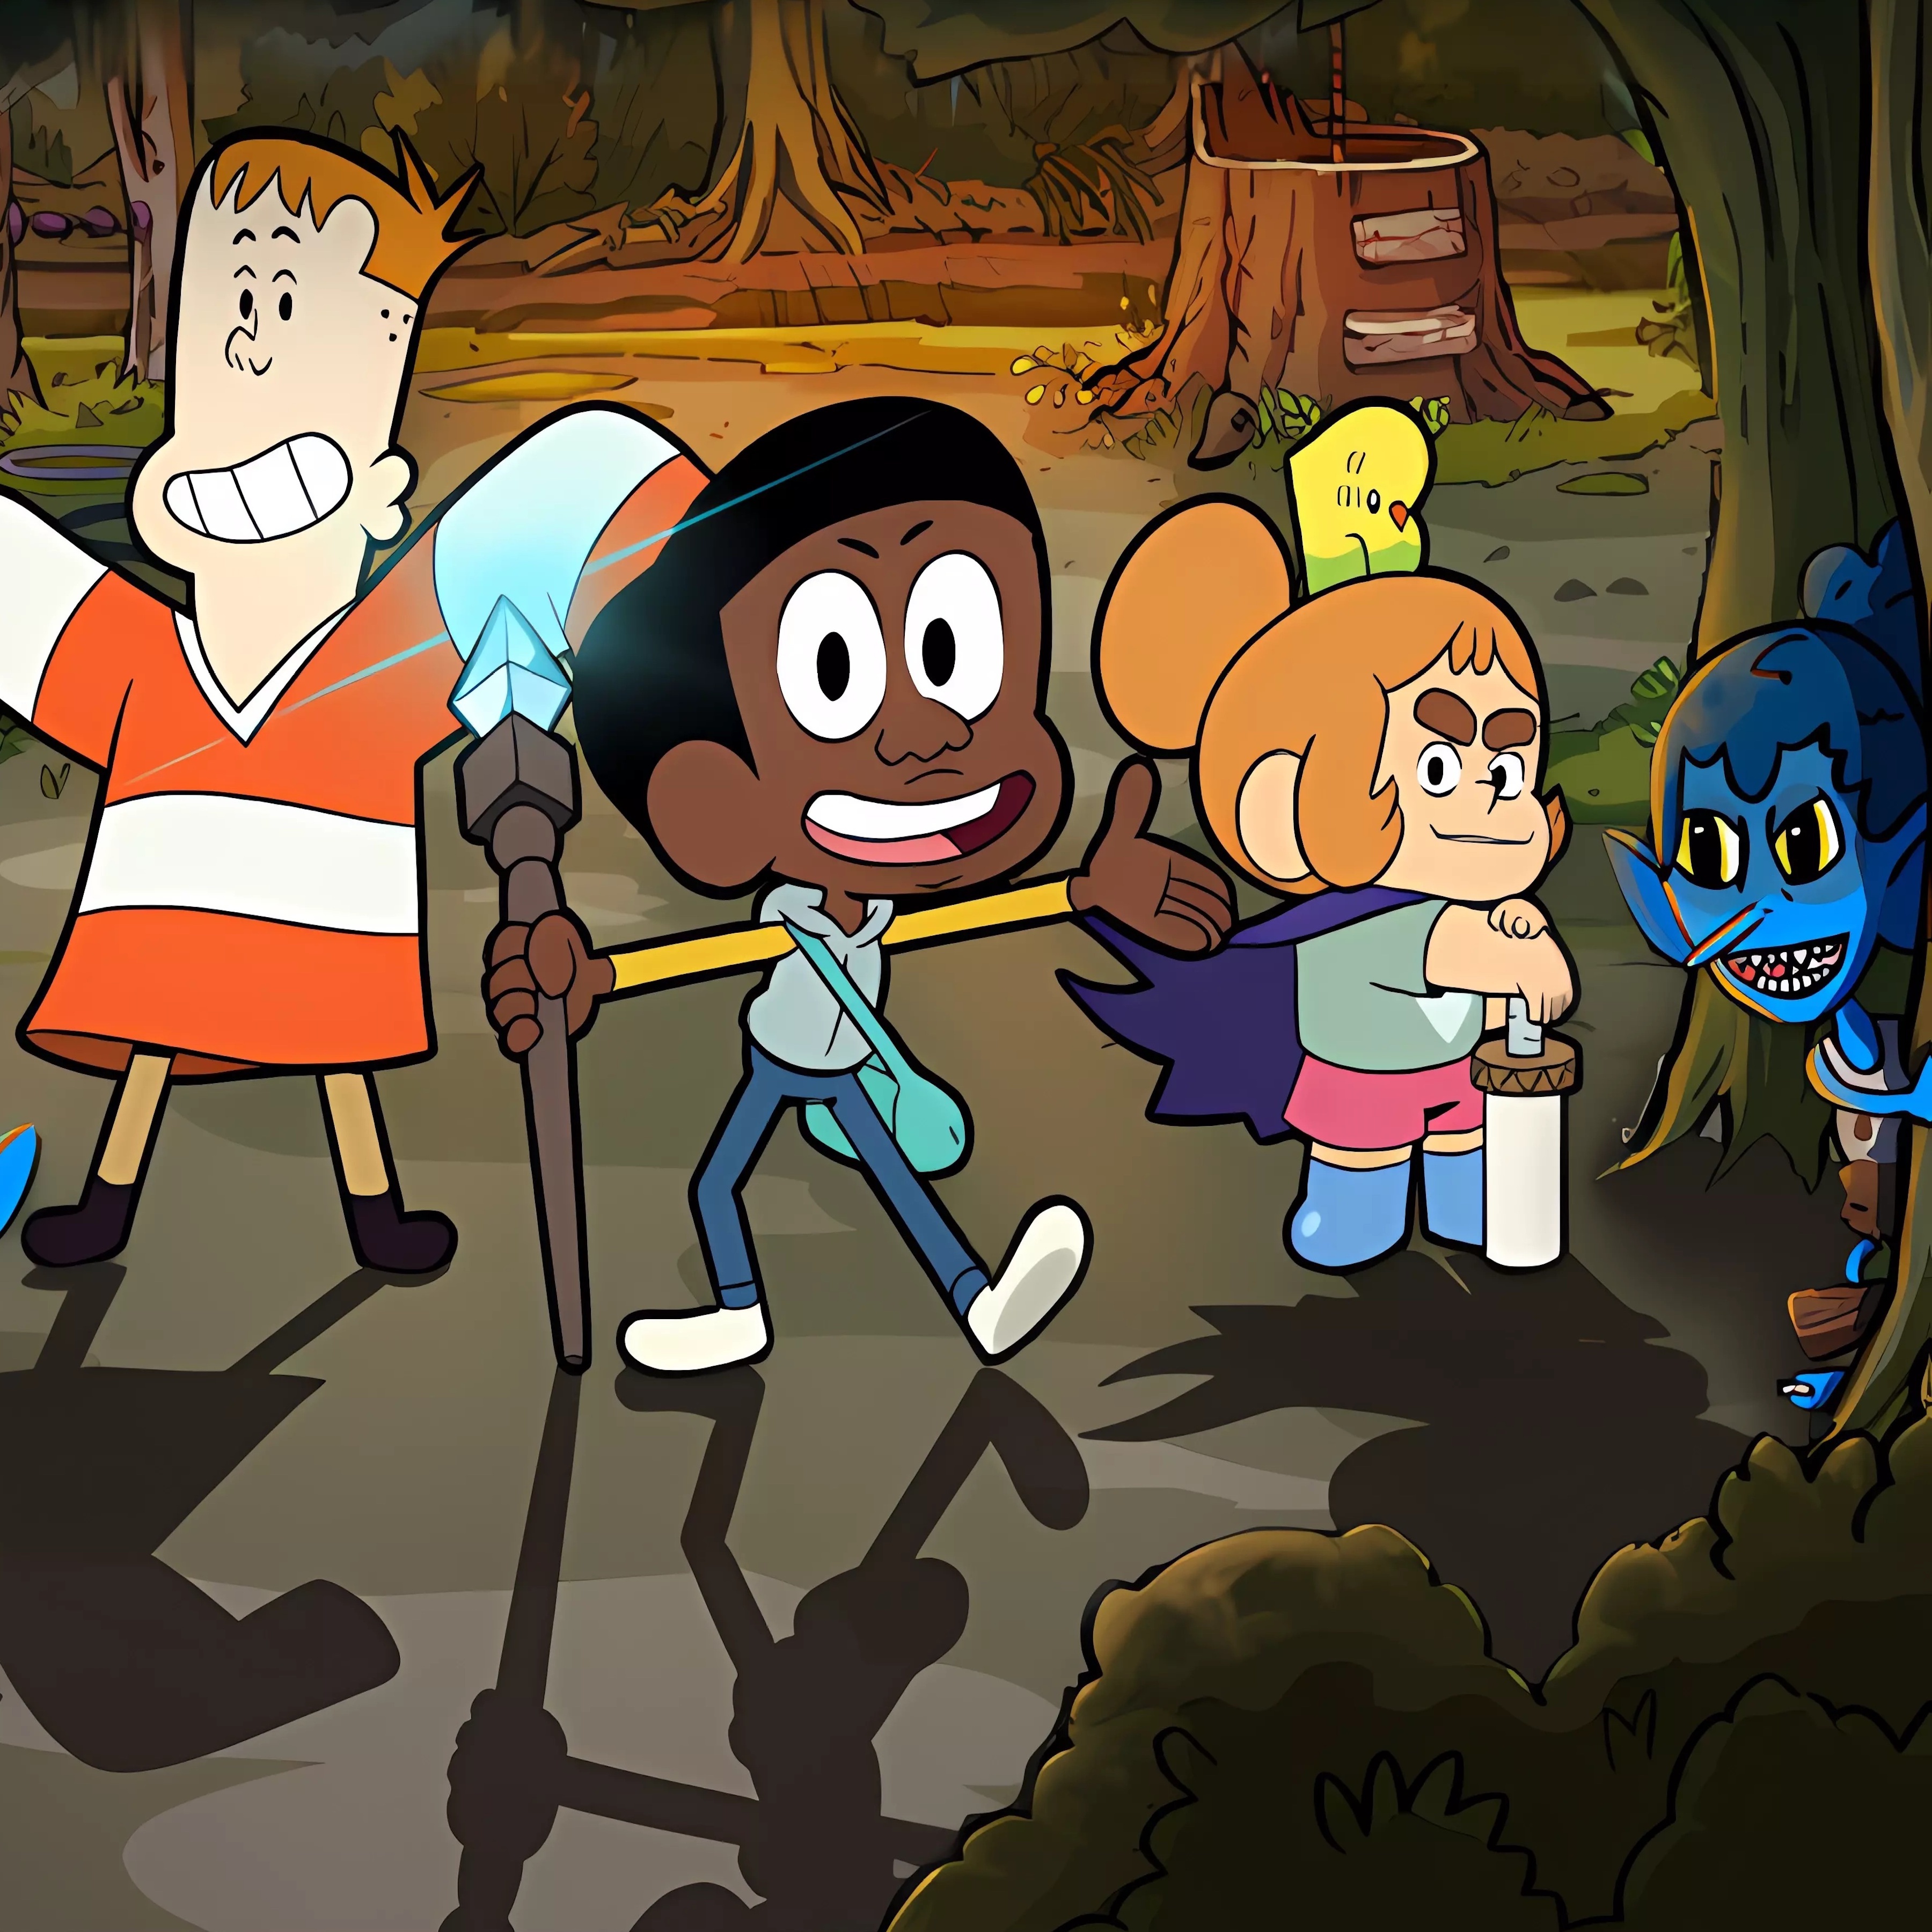 Craig of the Creek – Legend of the Goblin King